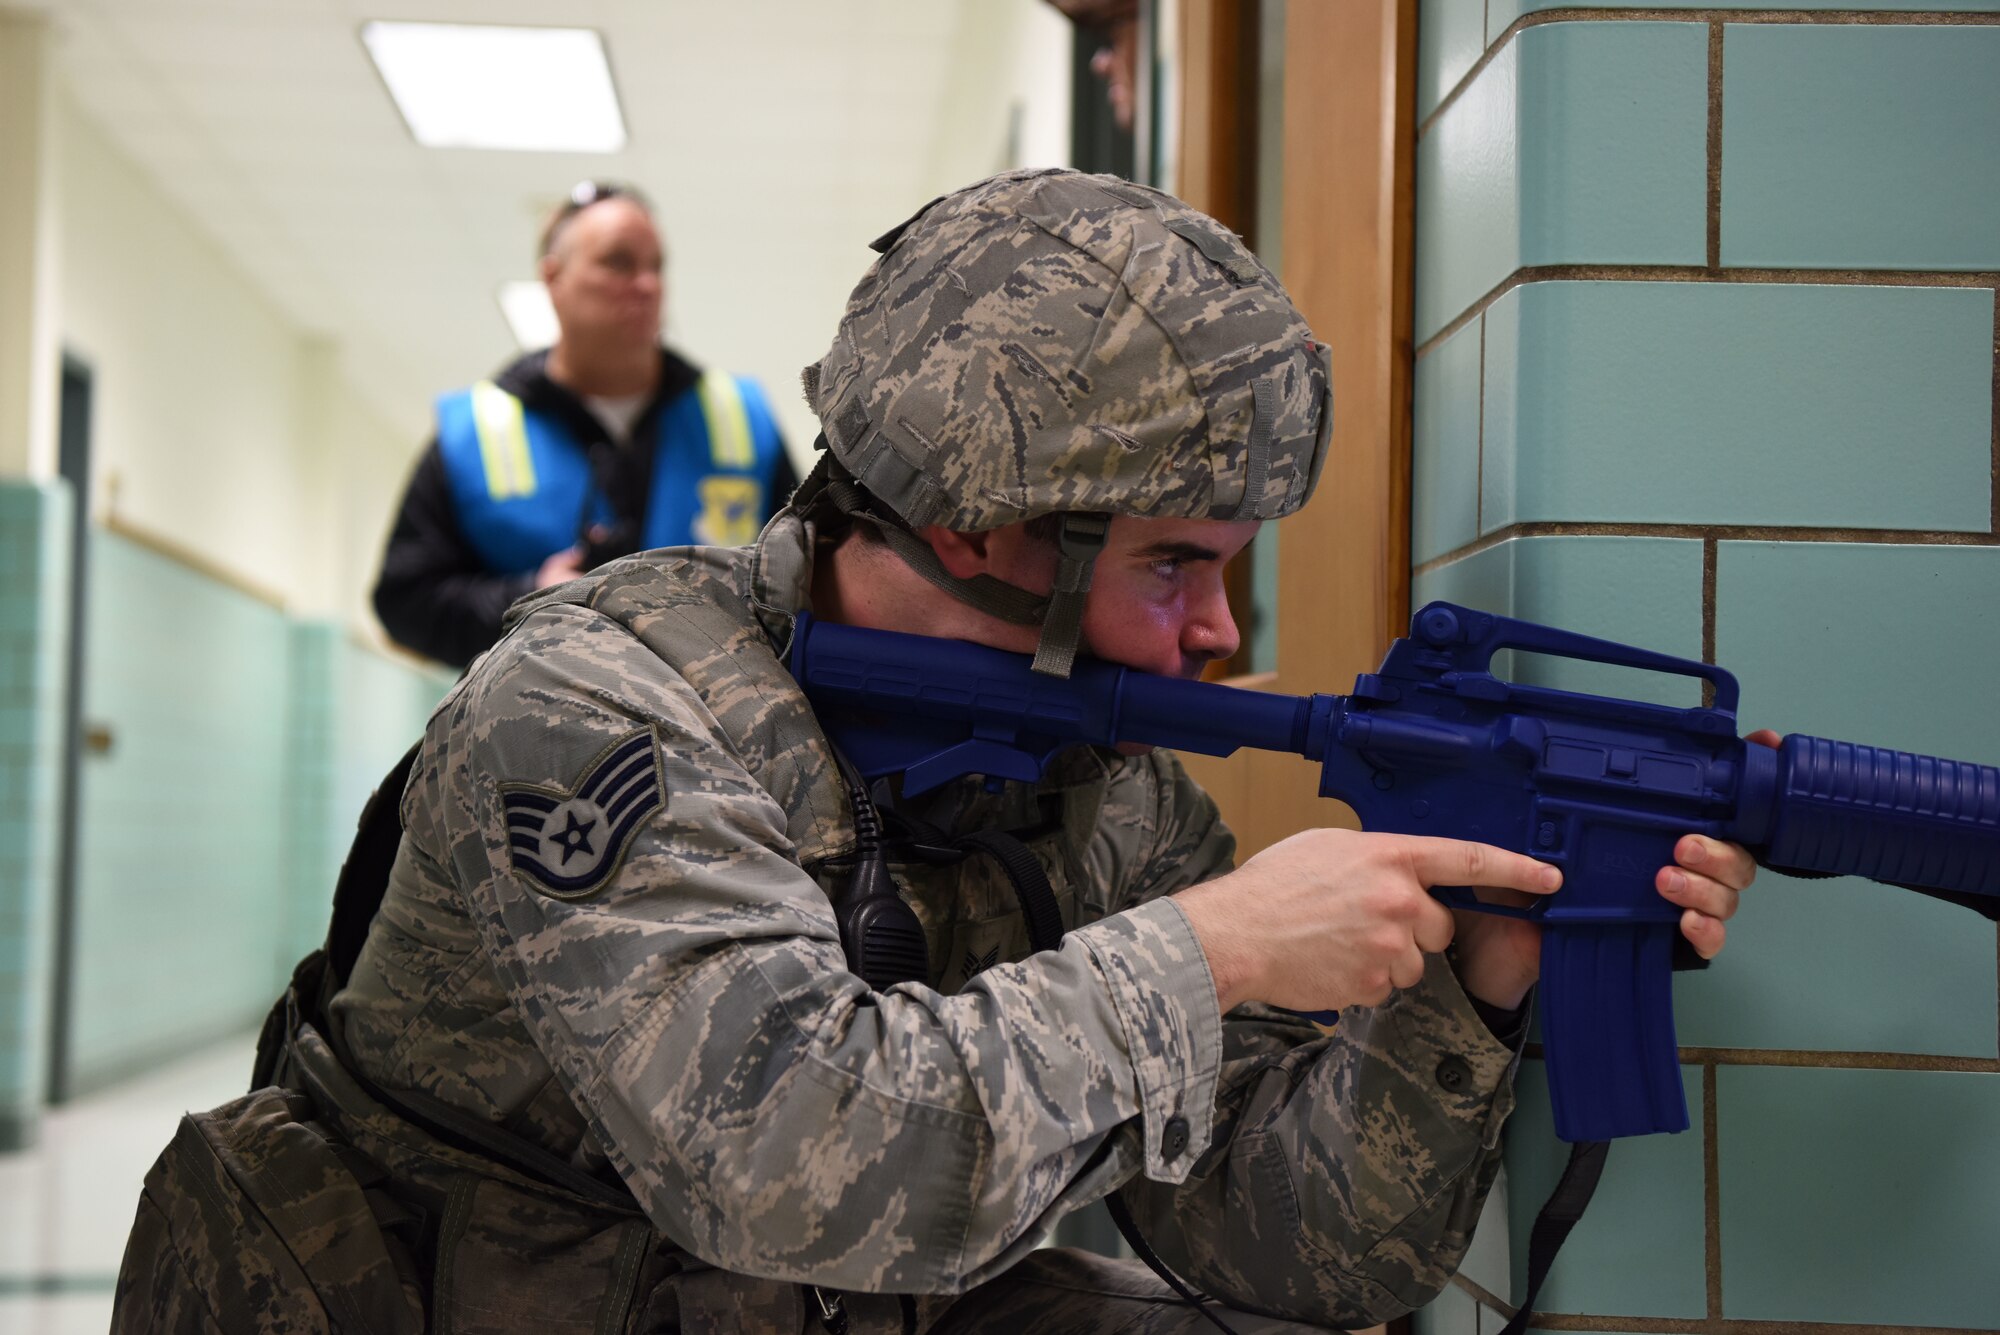 Staff Sgt. Issac McCauley, 436th Security Forces Squadron, stands guard in the George S. Welch Elementary School during an active shooter exercise Feb. 26, 2018, at Dover Air Force Base, Del. All responding defenders exchanged their duty weapons and ammunition for blue training replicas at the beginning of the exercise. (U.S. Air Force photo by Airman 1st Class Zoe M. Wockenfuss)